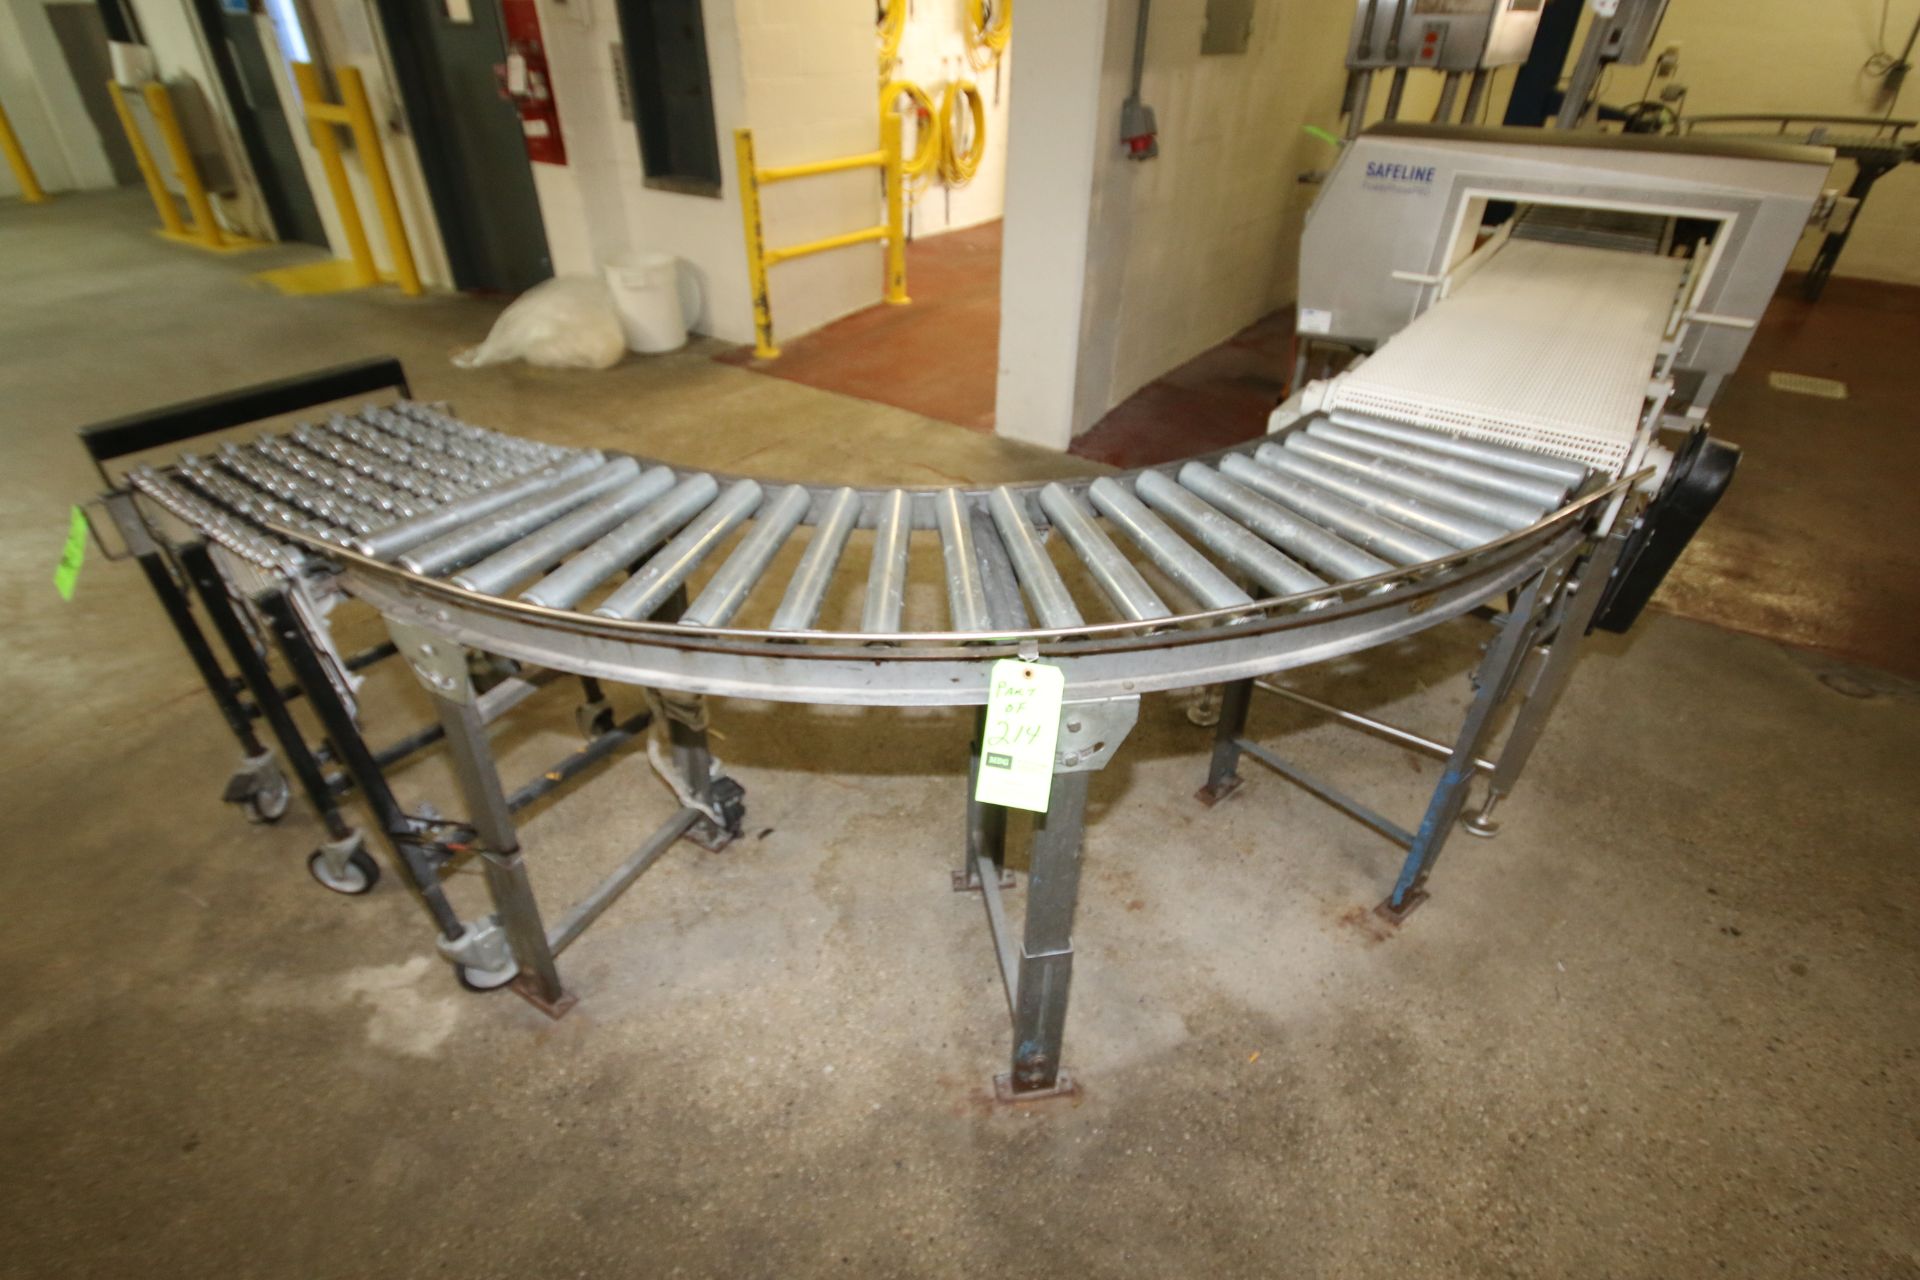 (6) Pc. - Skate Conveyor Sections - 10" W to 16" W  including Straight Sections, Bends and Stand (40 - Image 2 of 4